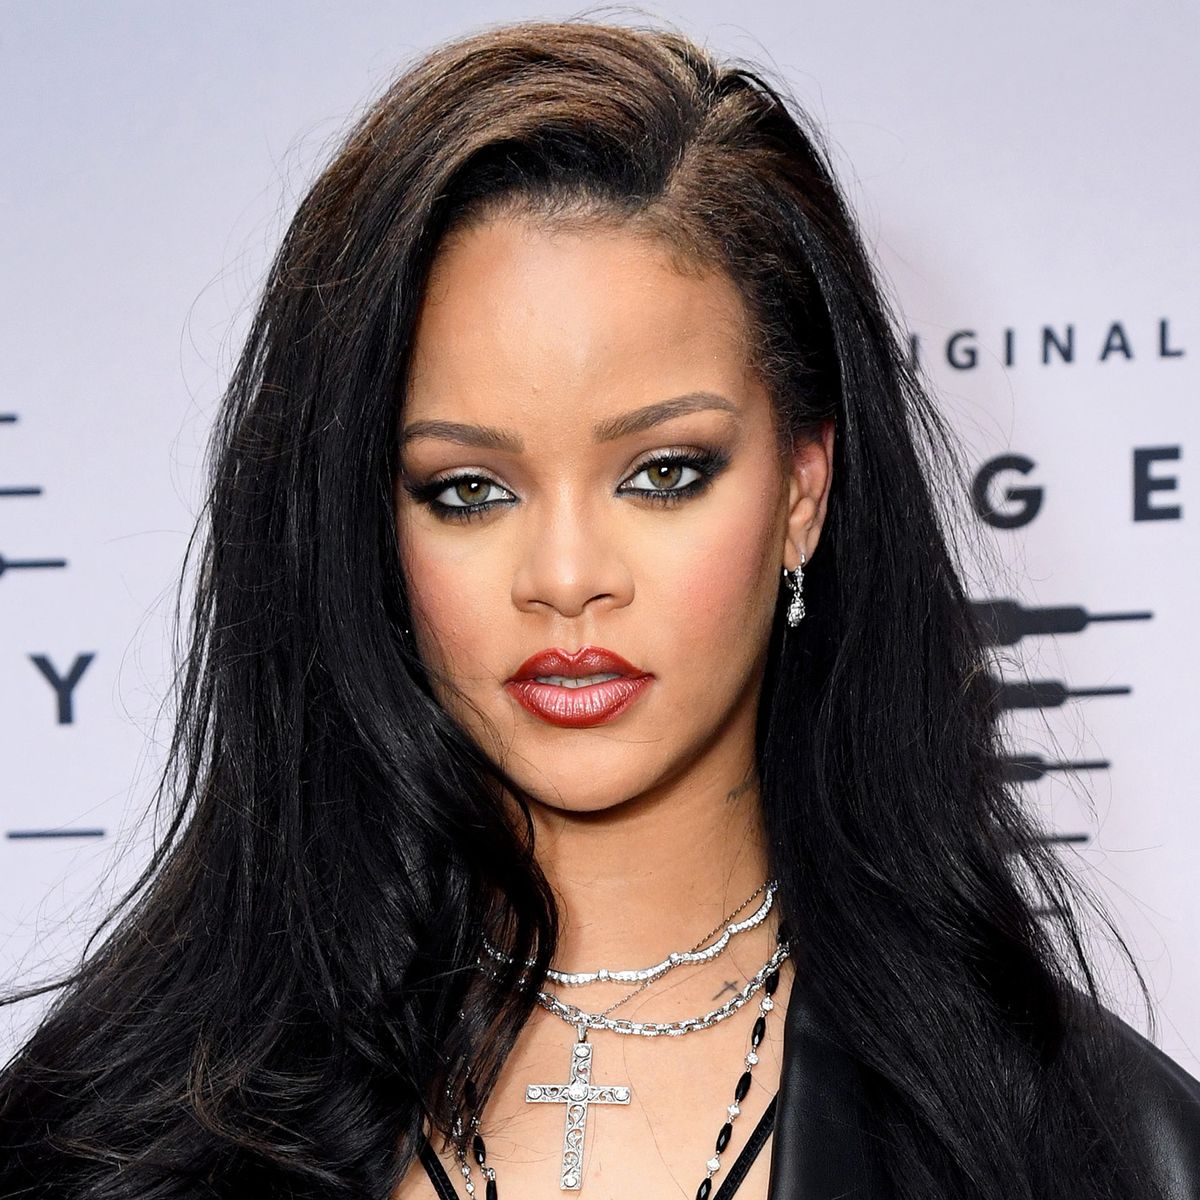 Rihanna Apologizes for Using Islamic Text in Fashion Show